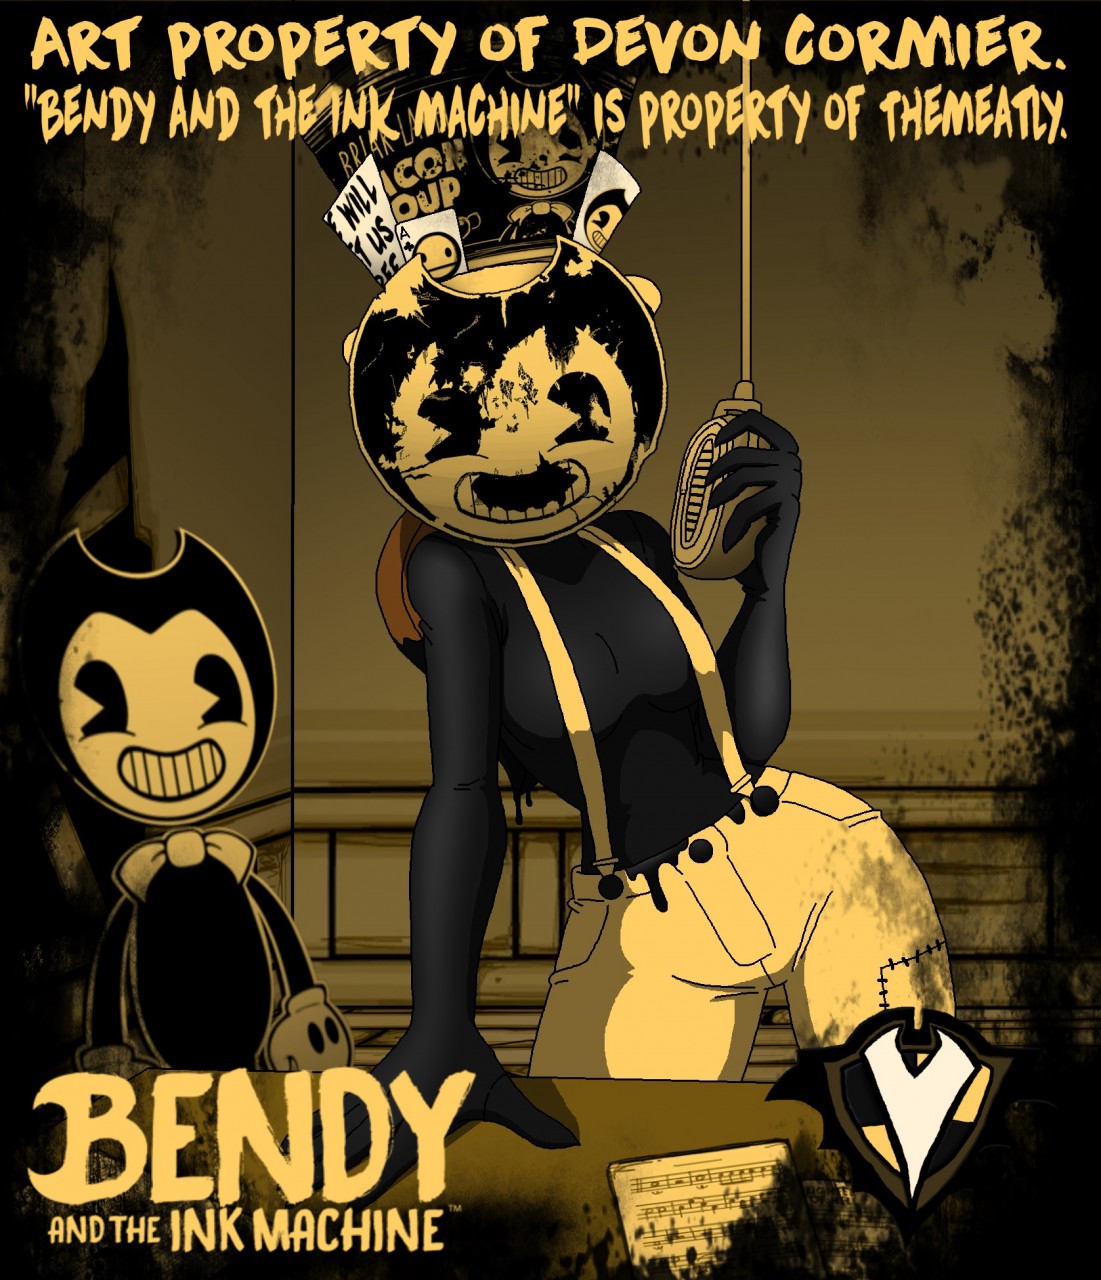 2354. Category. bendy_and_the_ink_machine. 